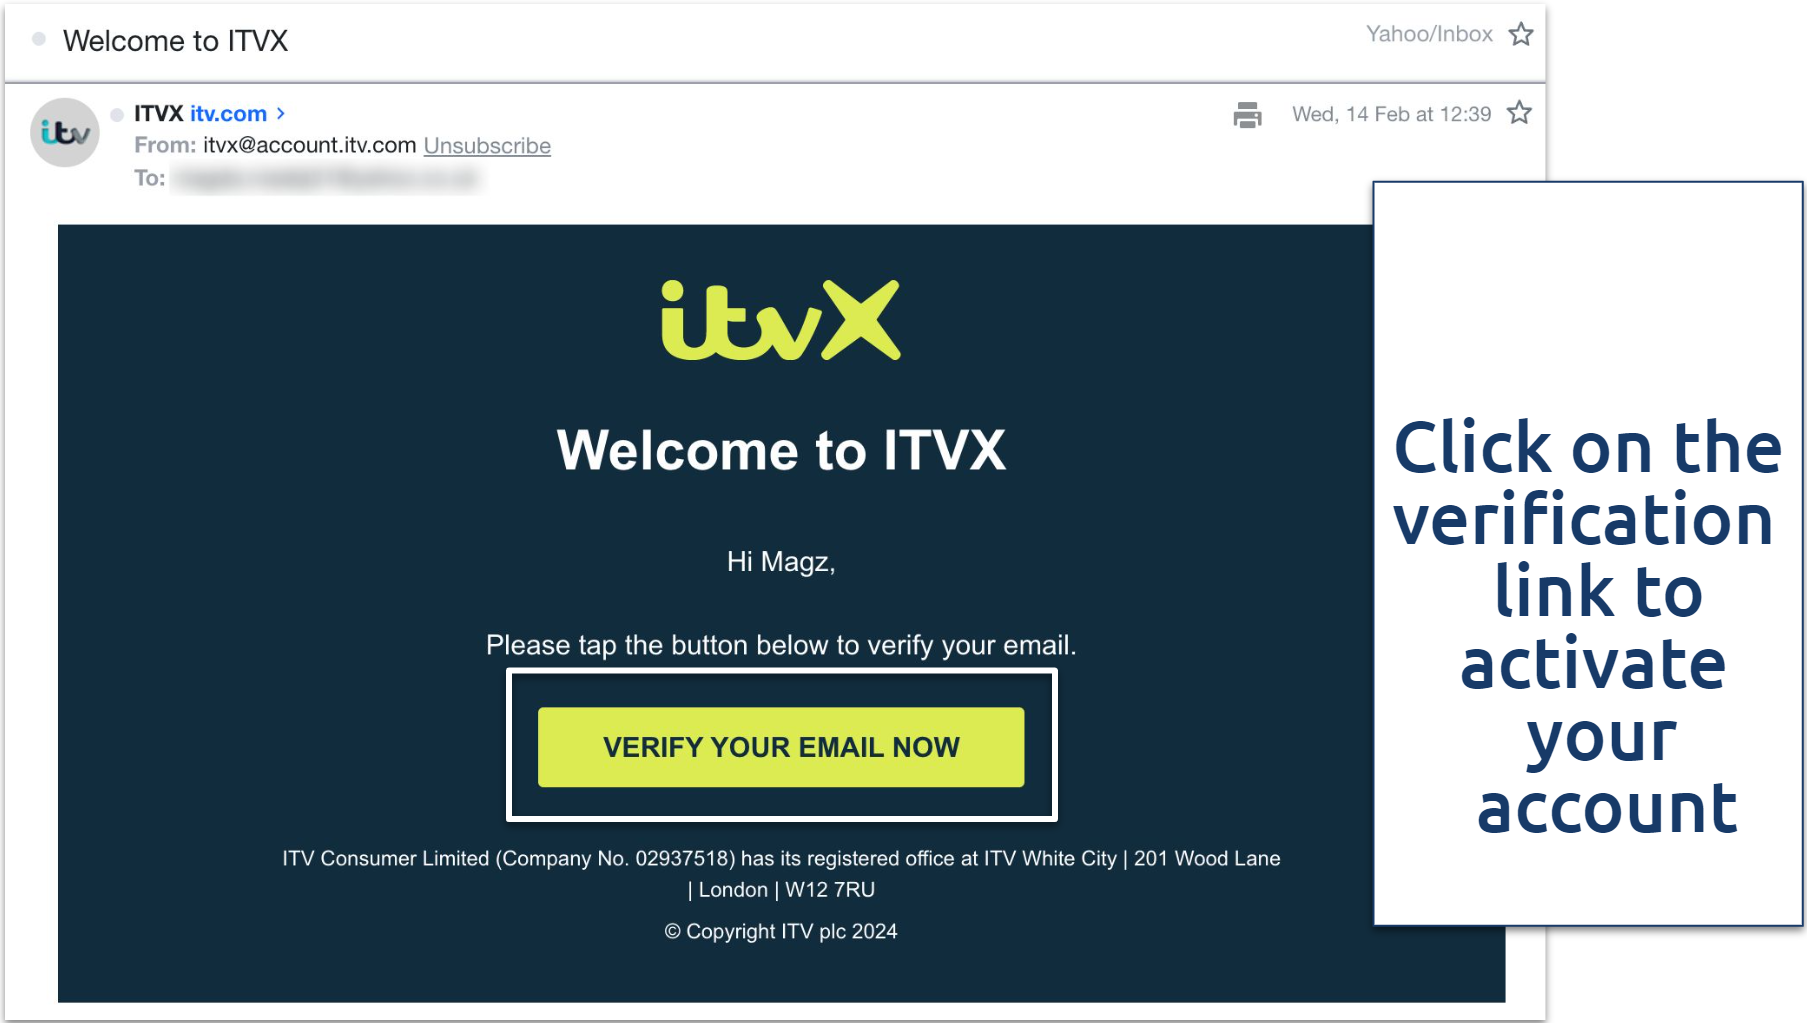 Screenshot of the ITVX verification email